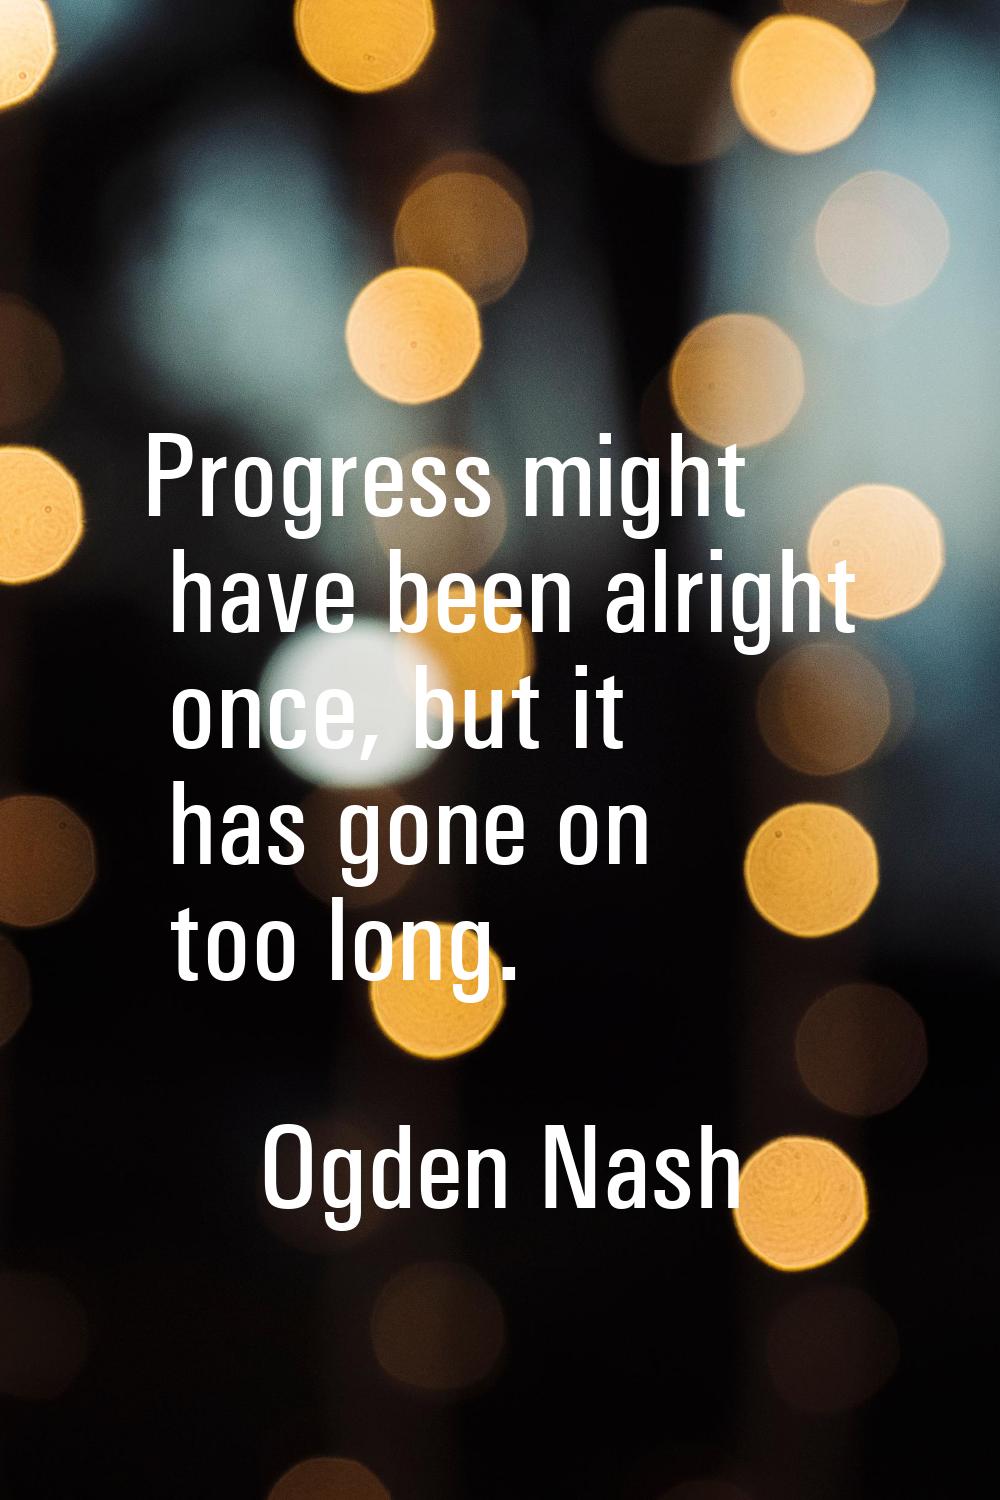 Progress might have been alright once, but it has gone on too long.